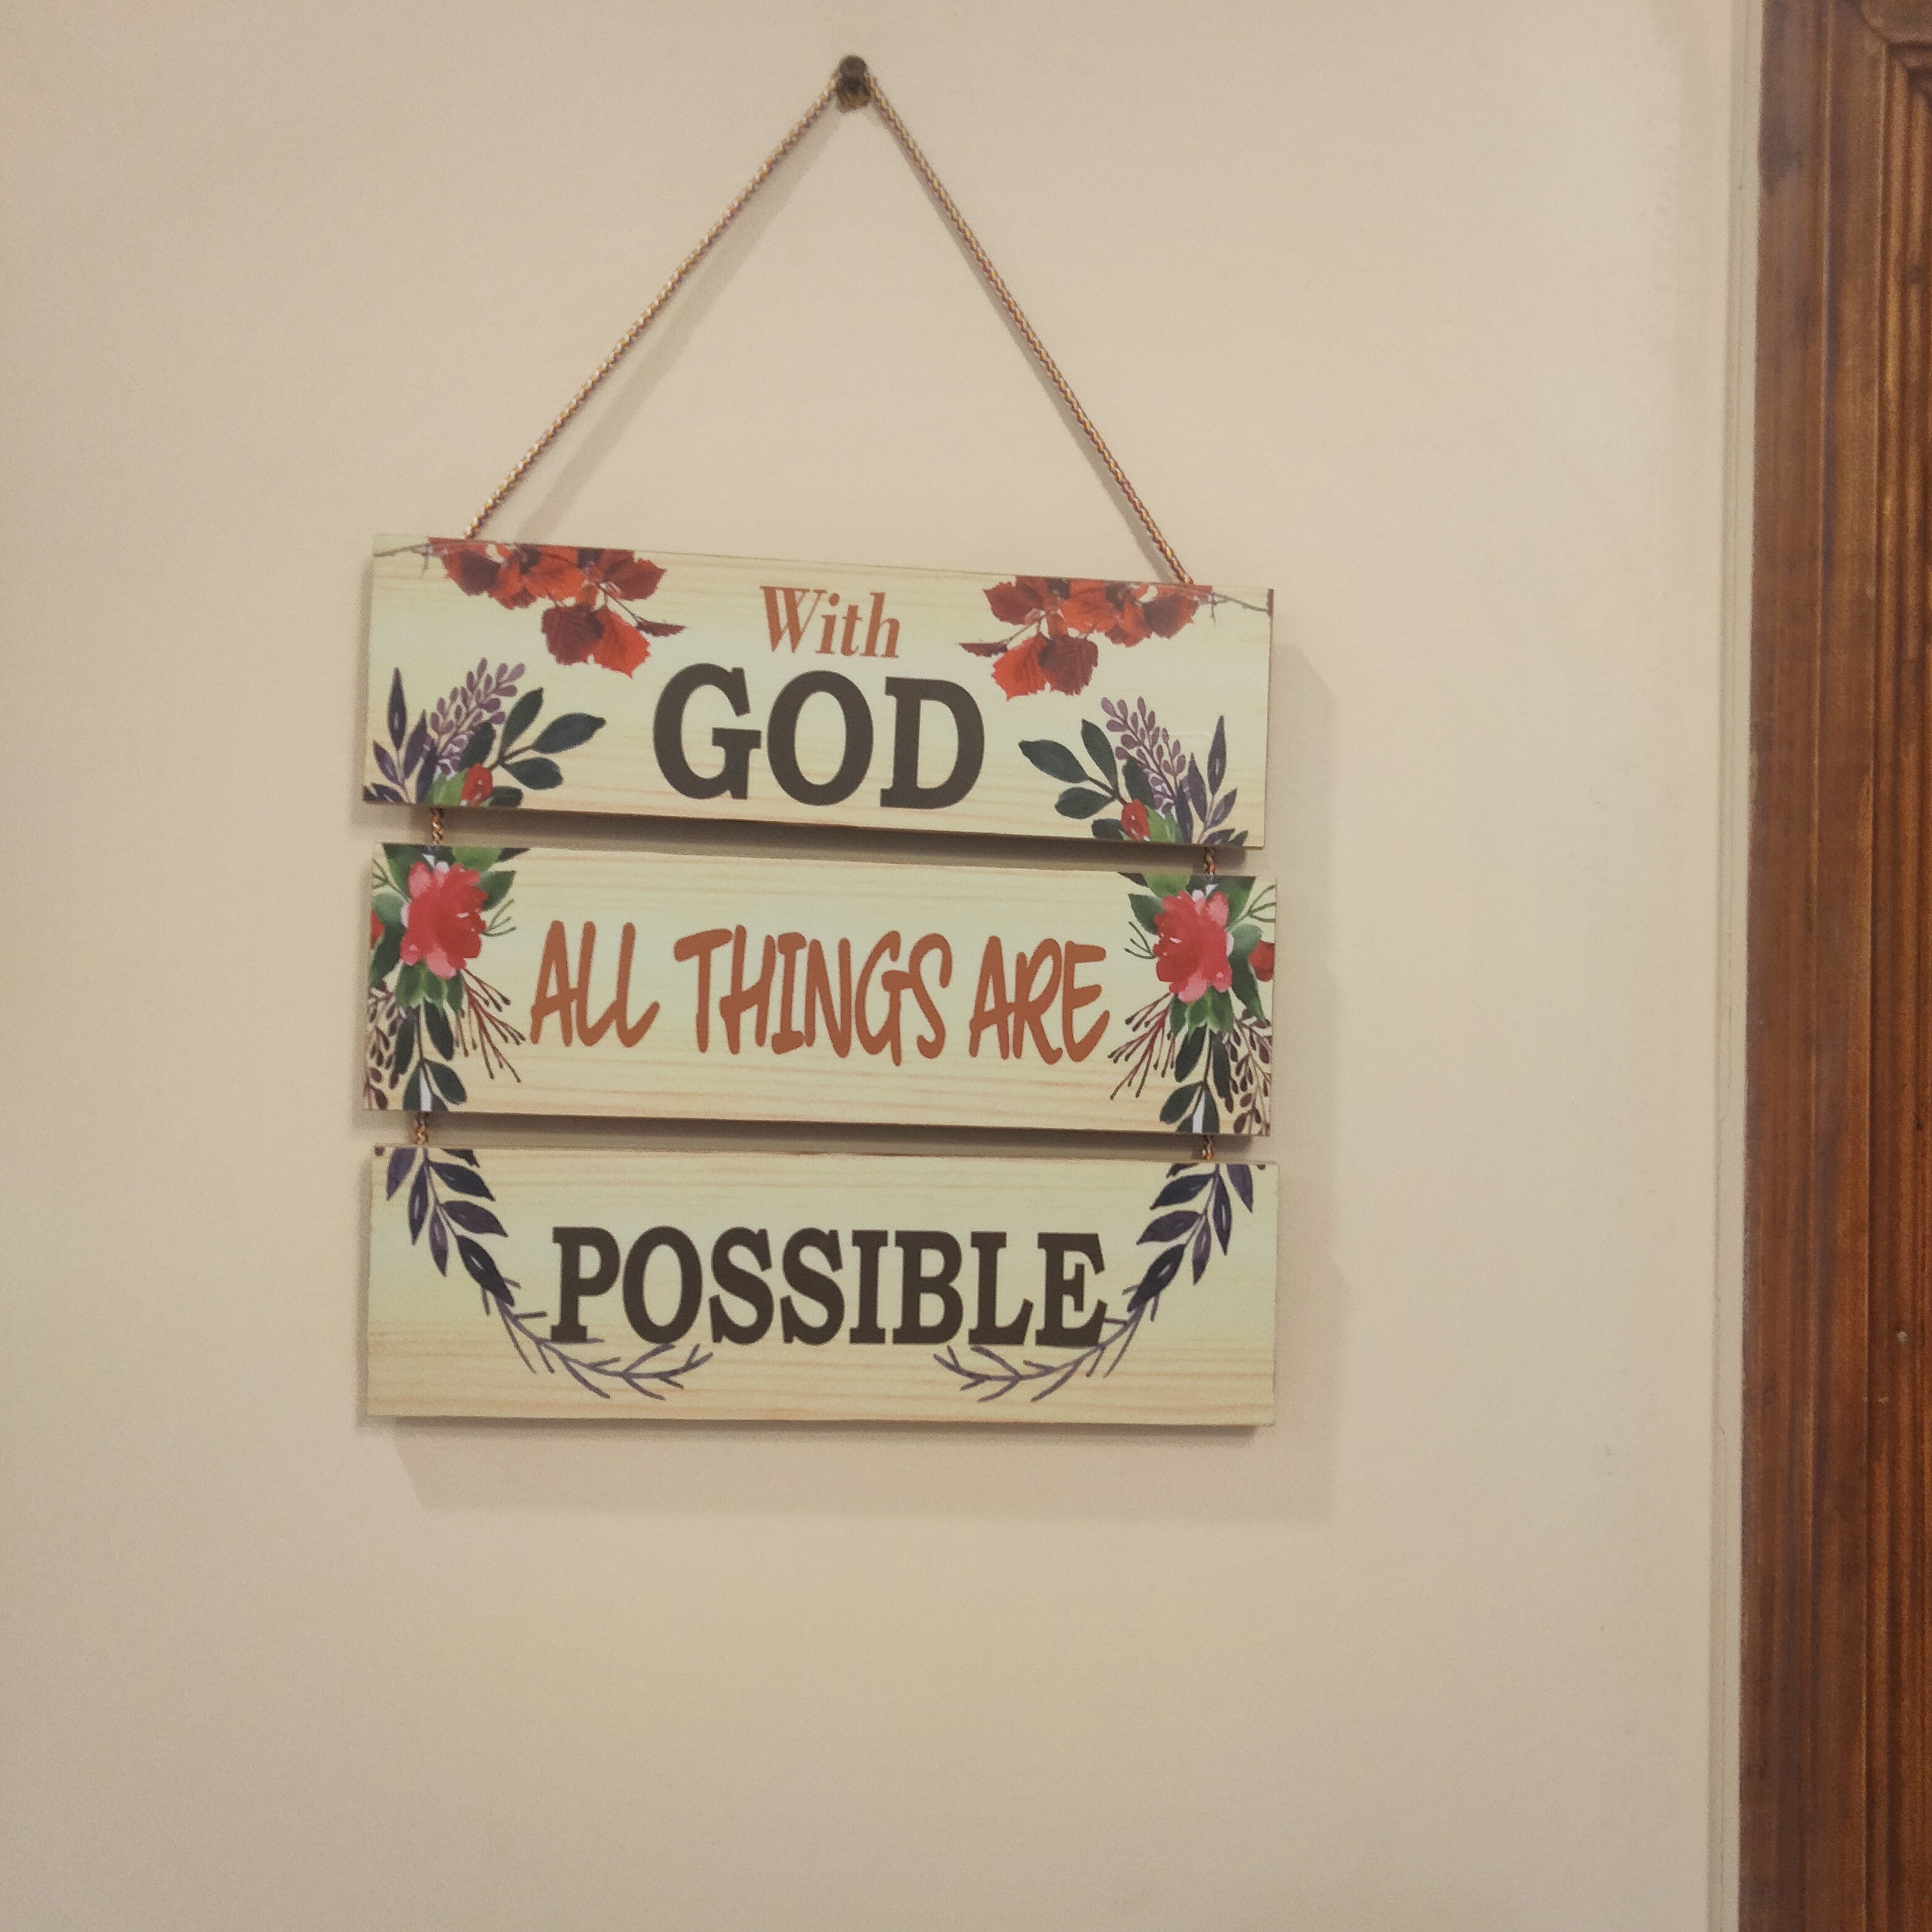 With God all things are possible quote wall decoration hanging